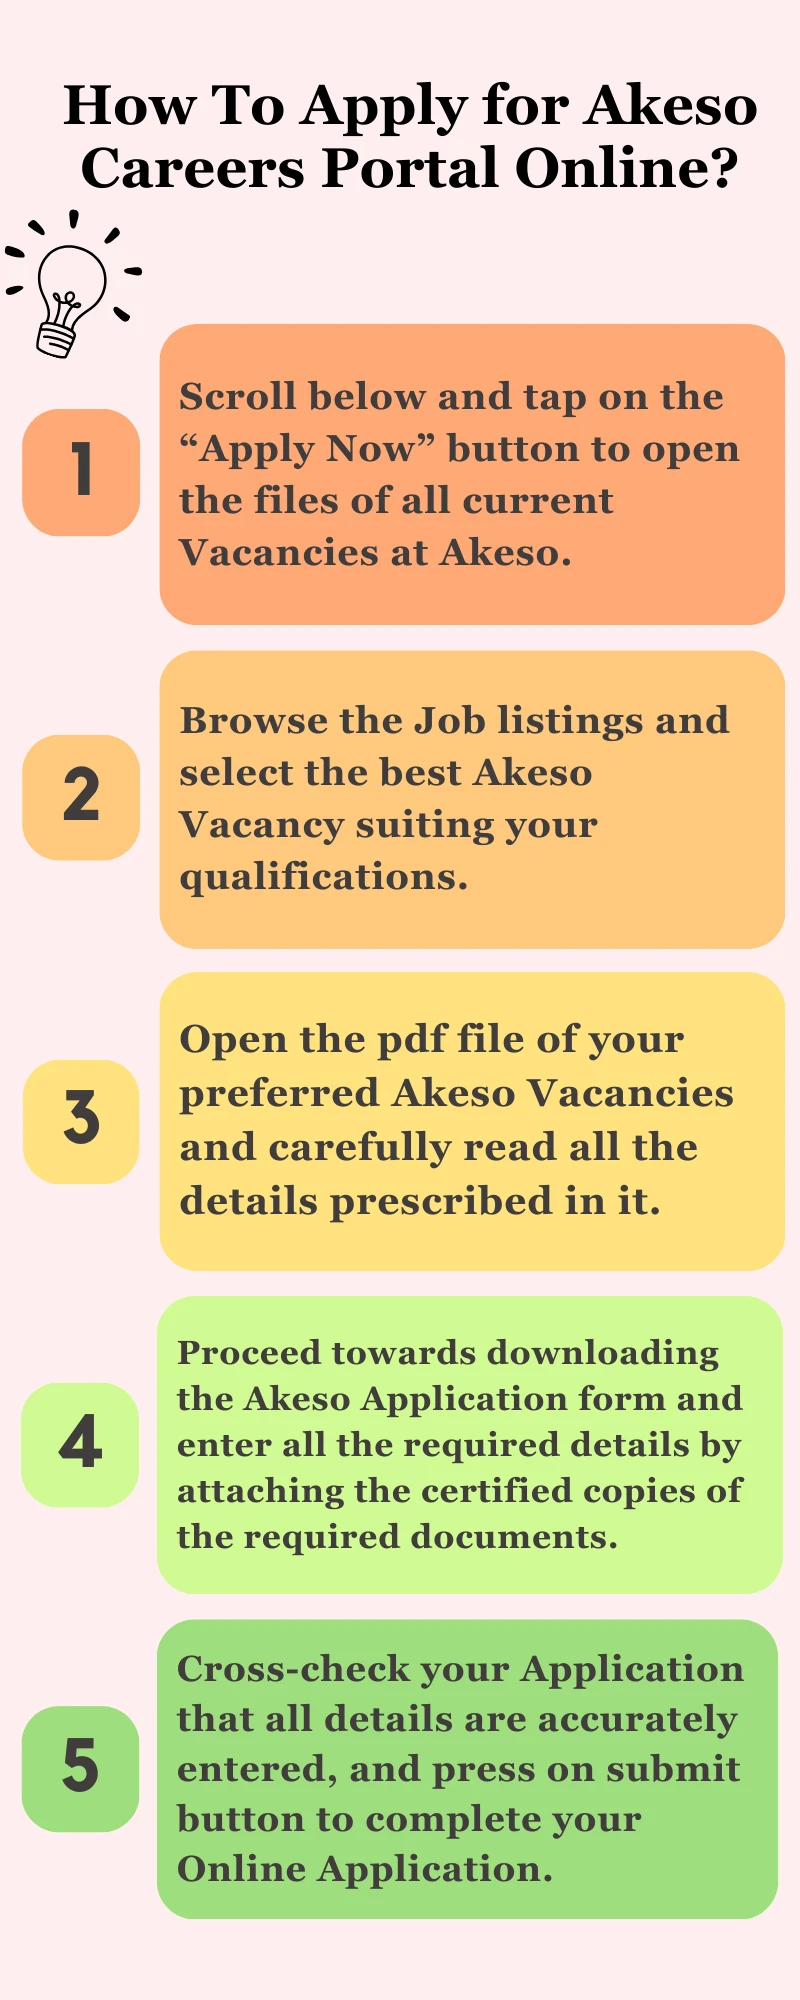 How To Apply for Akeso Careers Portal Online?